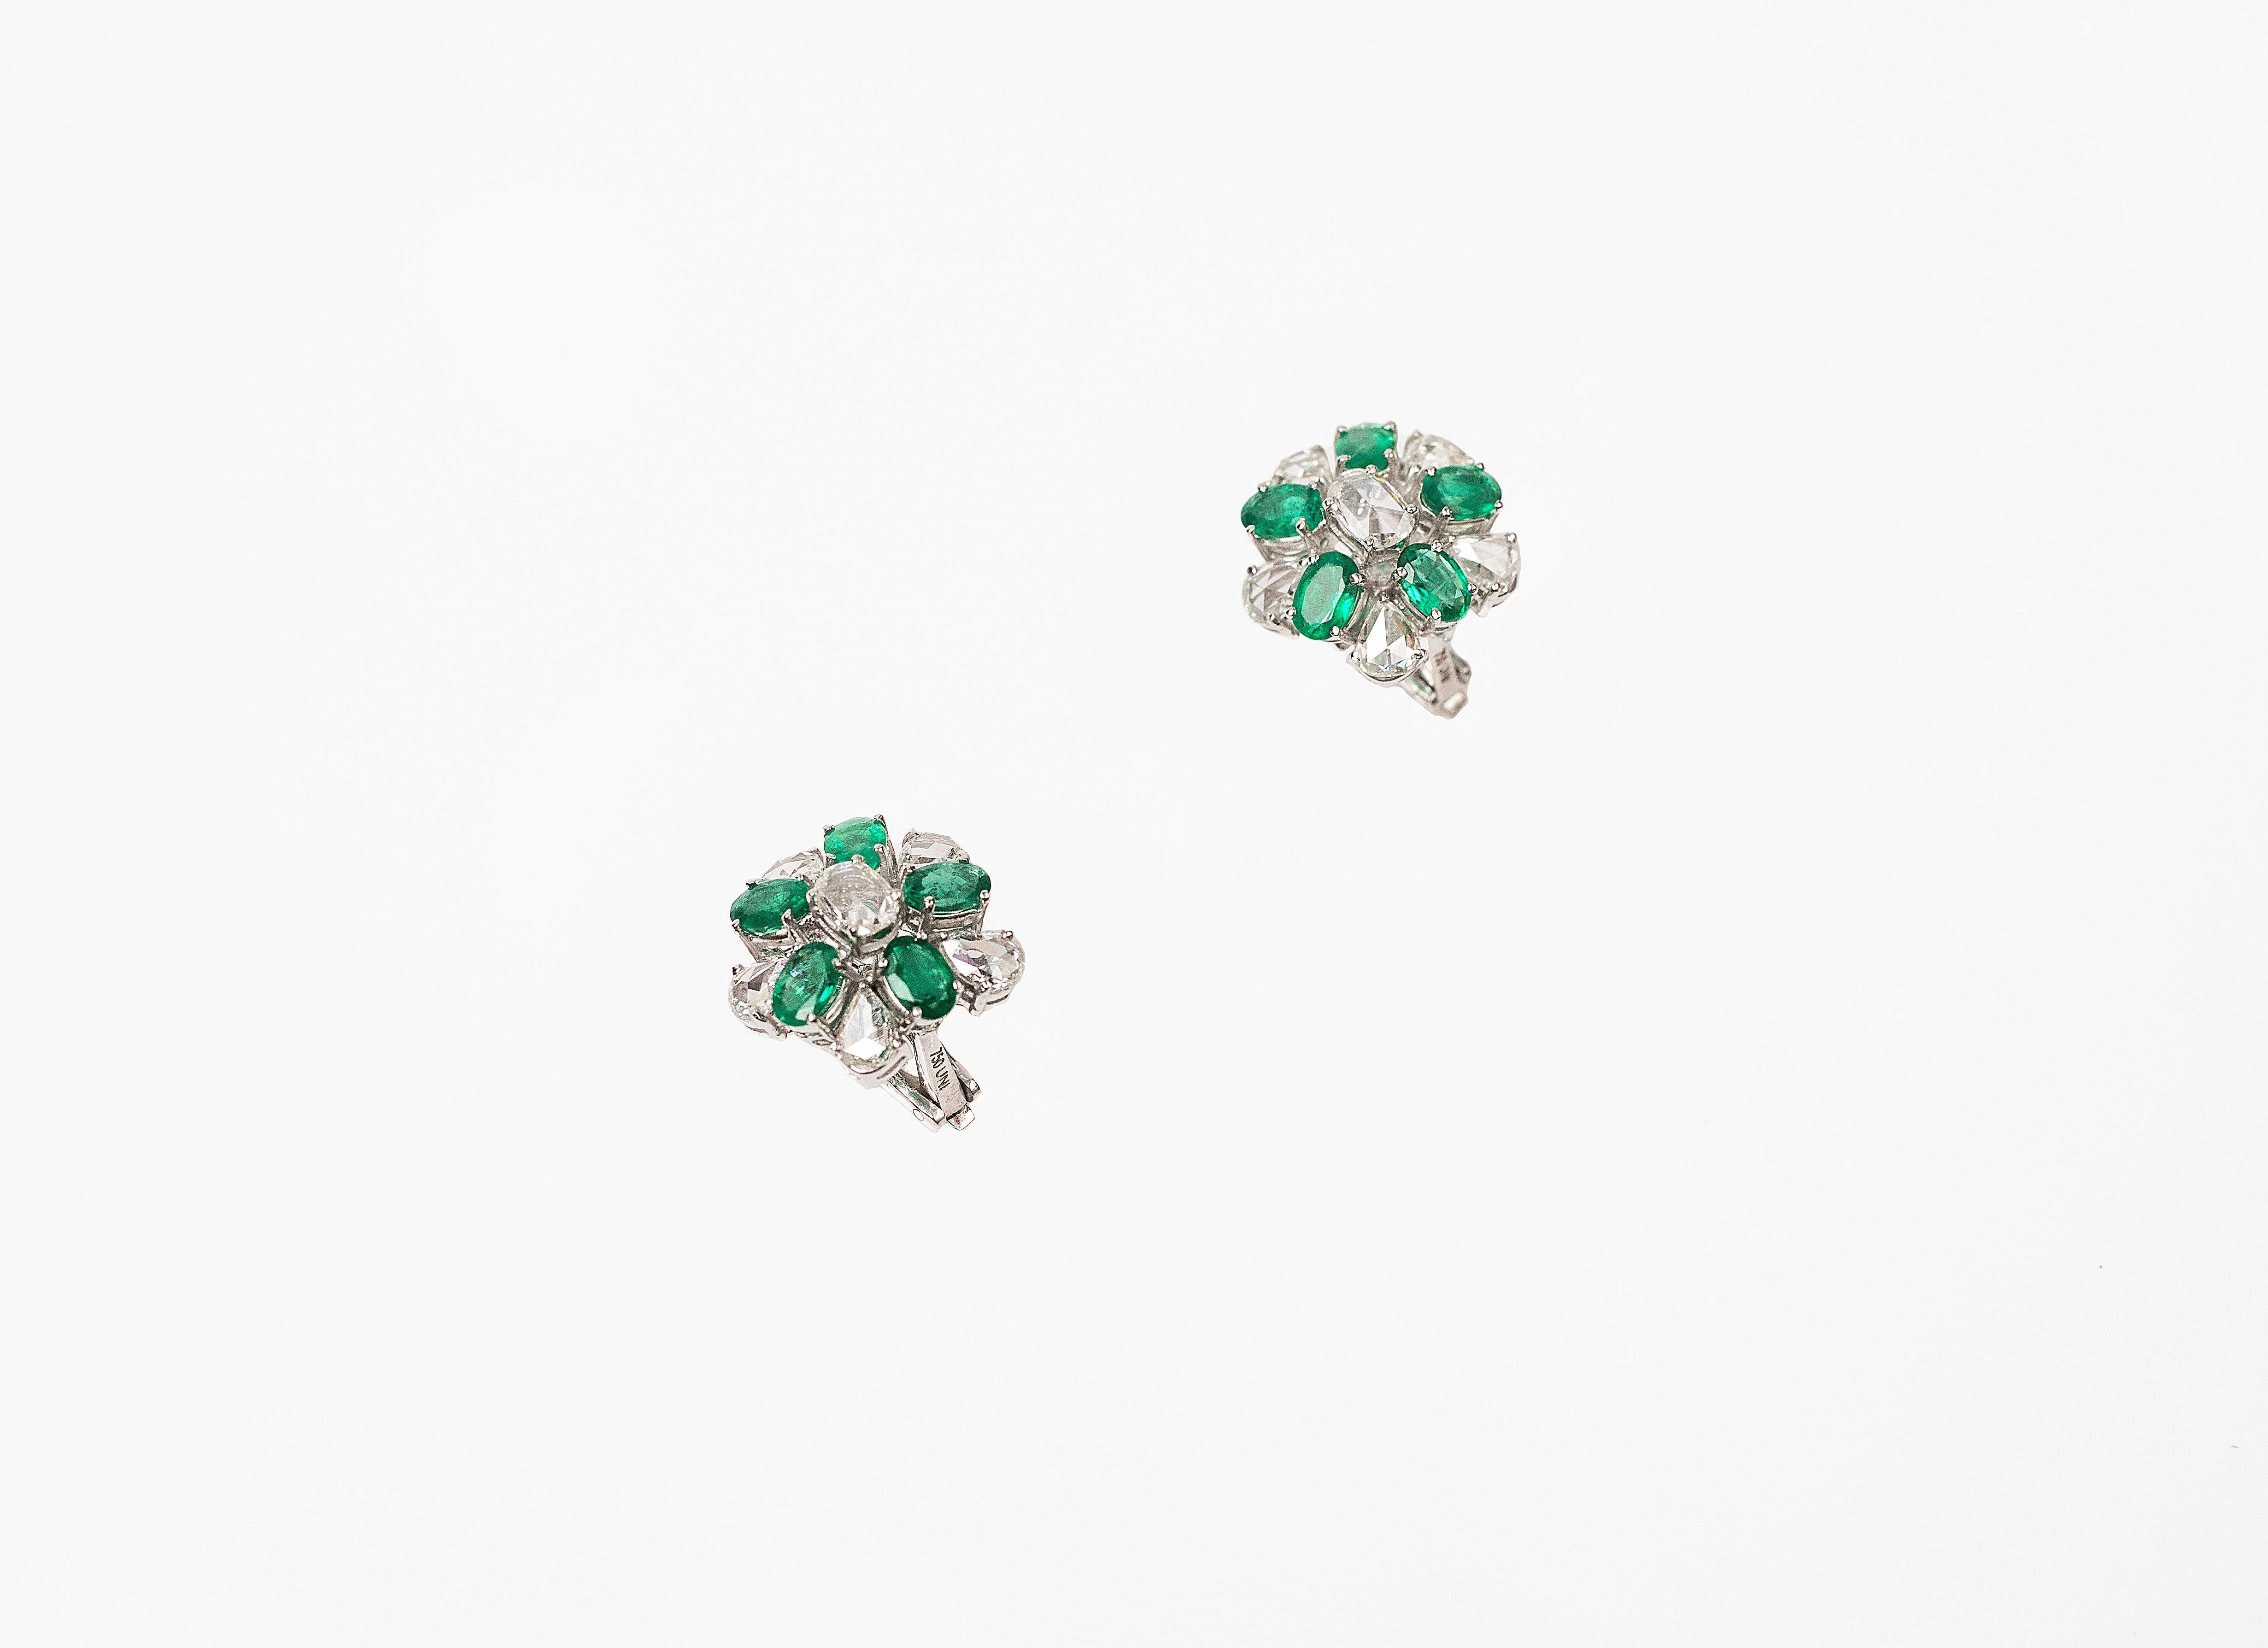 Handcrafted Rose Cut Diamond and Natural Emerald Earrings Studs in 18K Gold.
Gold Weight - 11.634 gms
Diamond Clarity - VS
Diamond Colour - F-G
Emerald  - Natural
Post and Clip System
